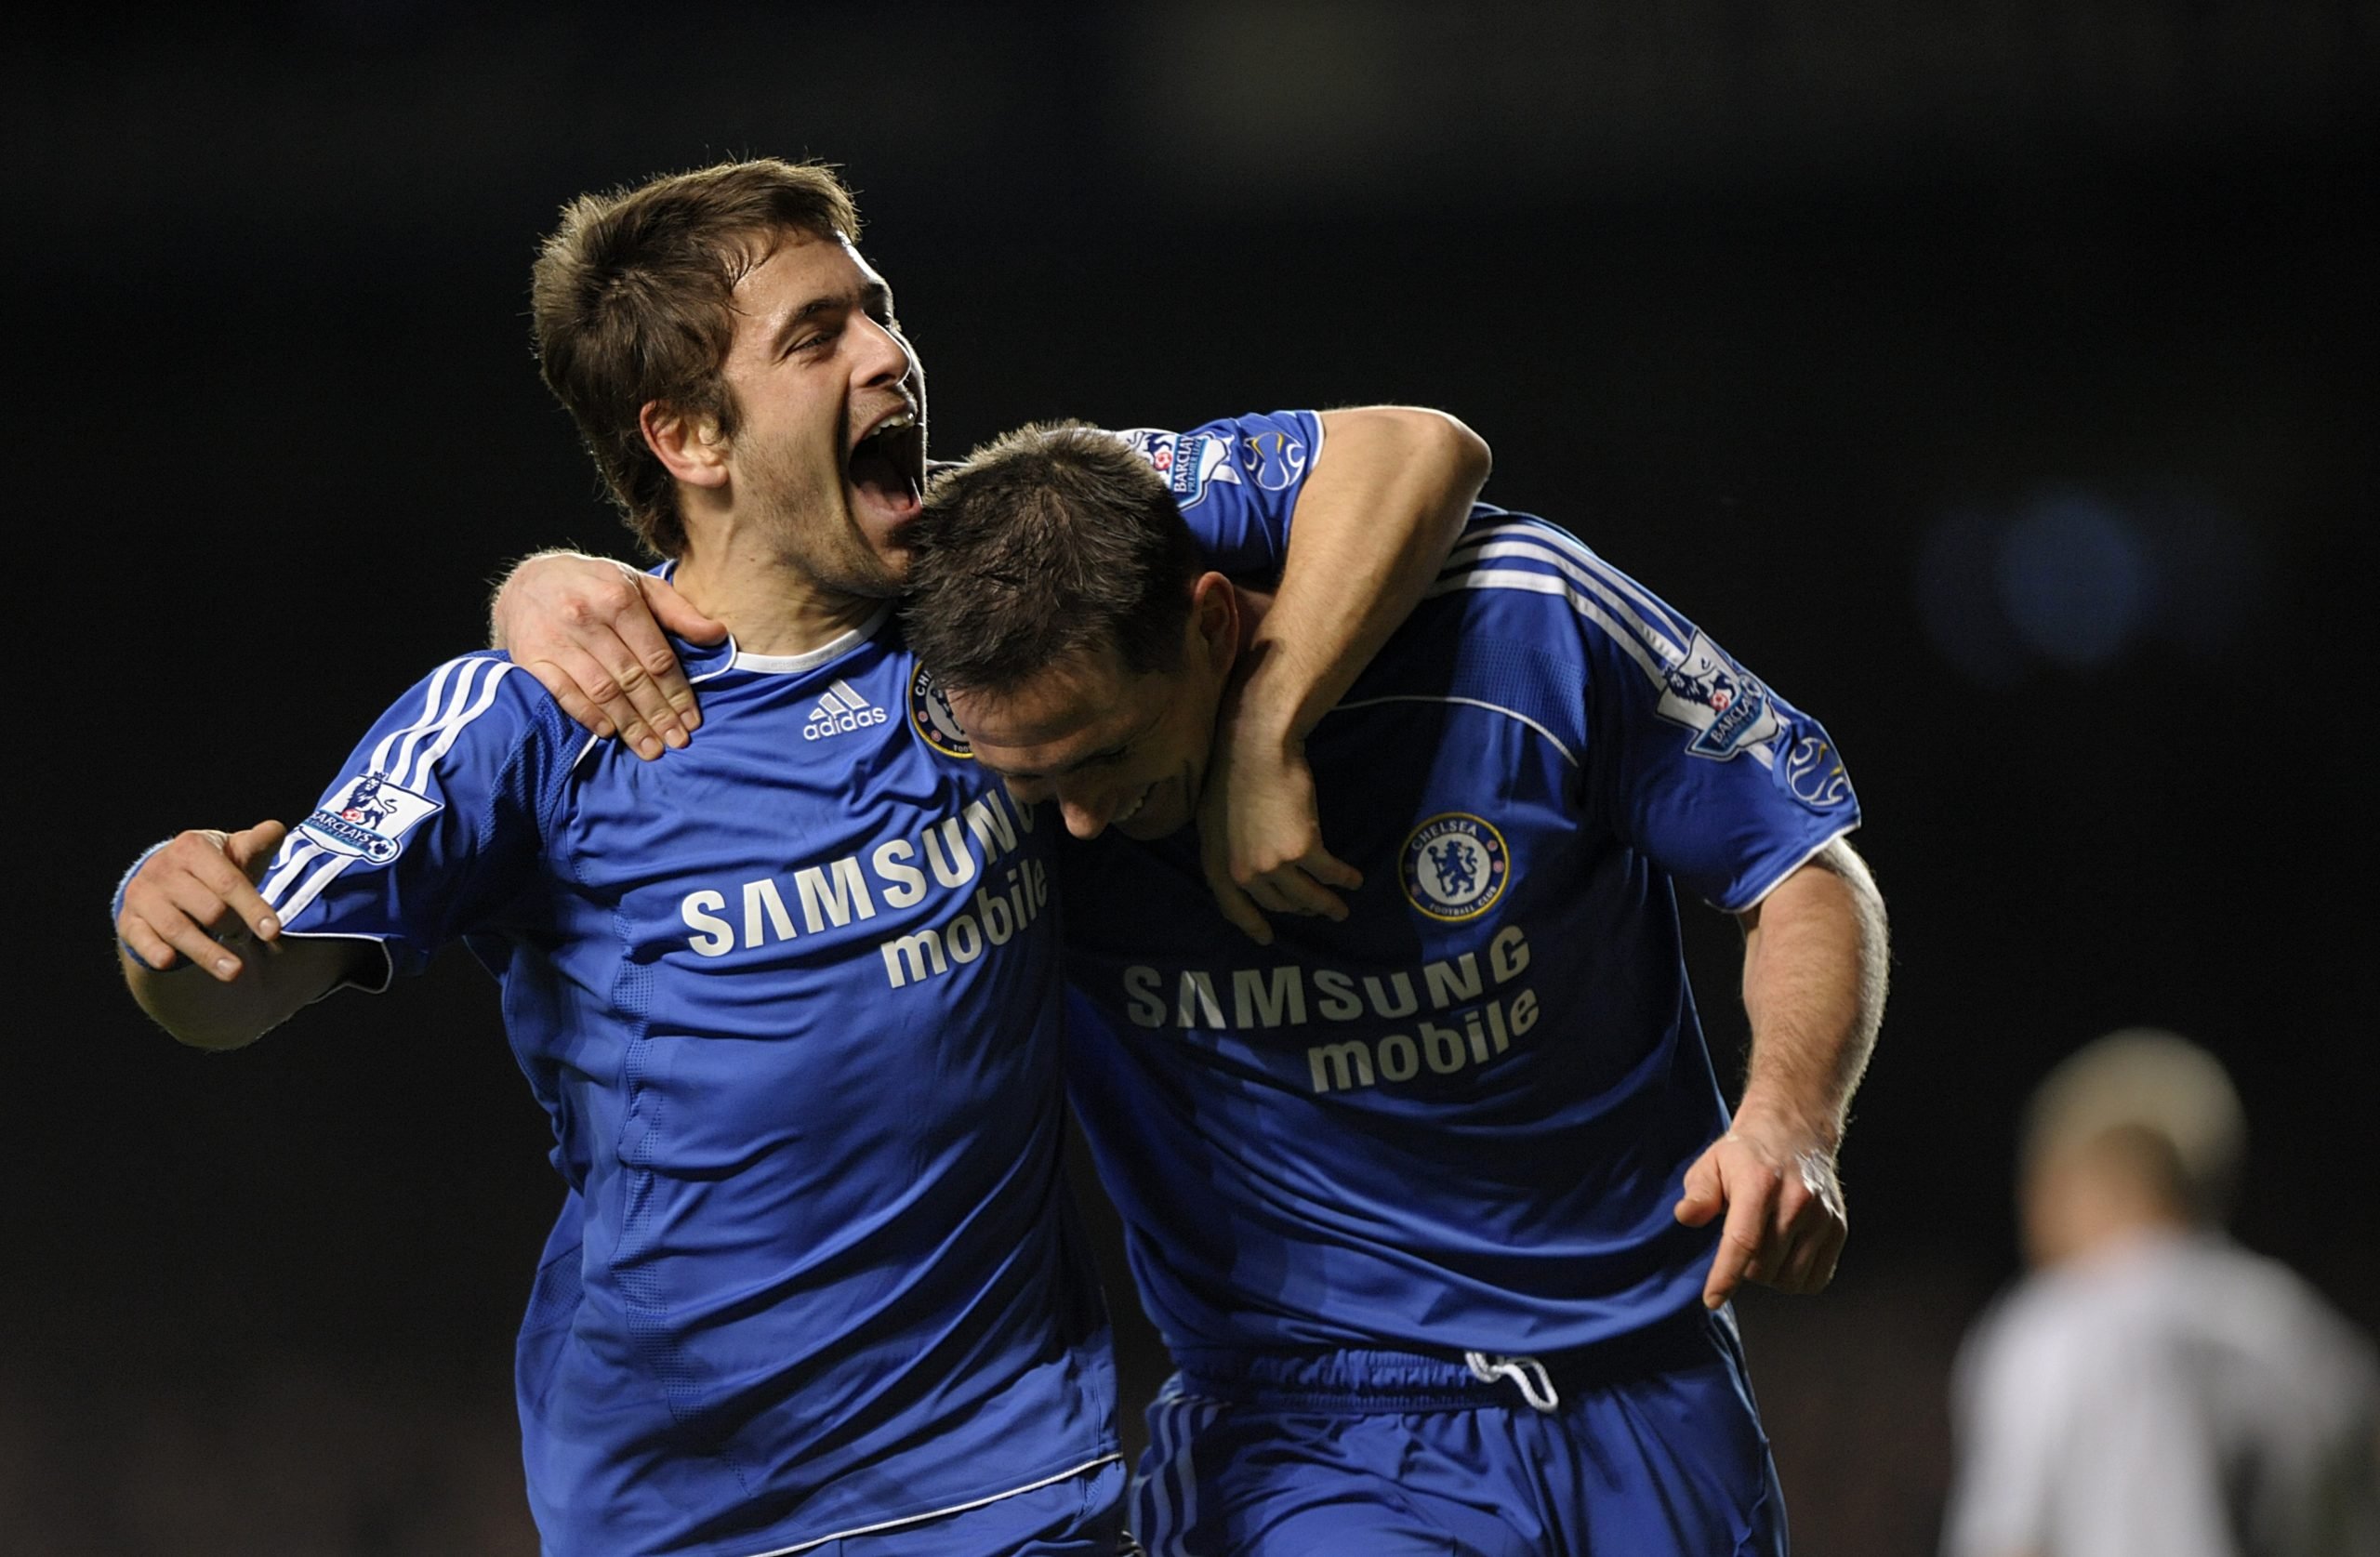 'Maybe': Joe Cole suggests current Chelsea star could even surpass Frank Lampard's legacy as a player